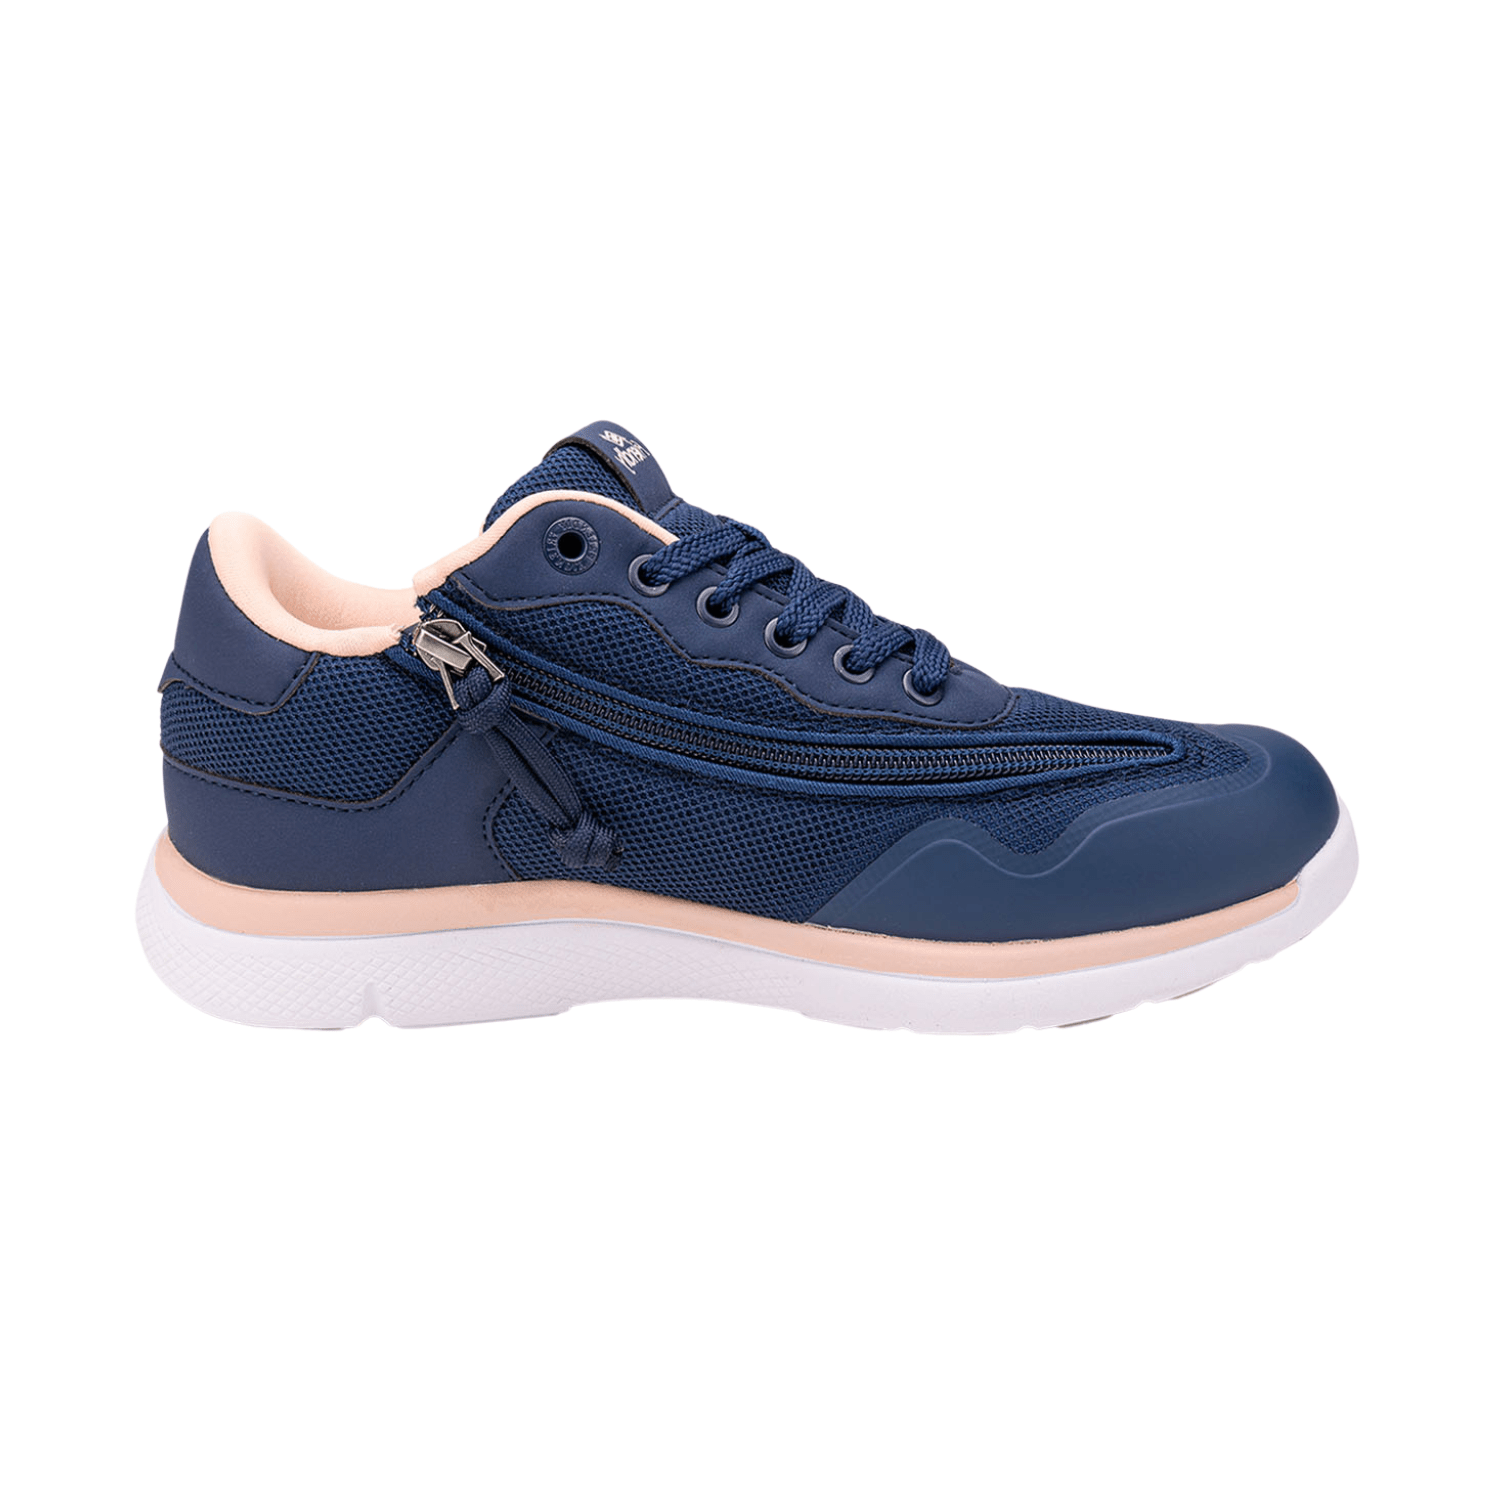 Voyage Navy Shoes - Women\'s Shoe All The Peach Shoe for Abilities & - Blue Friendly